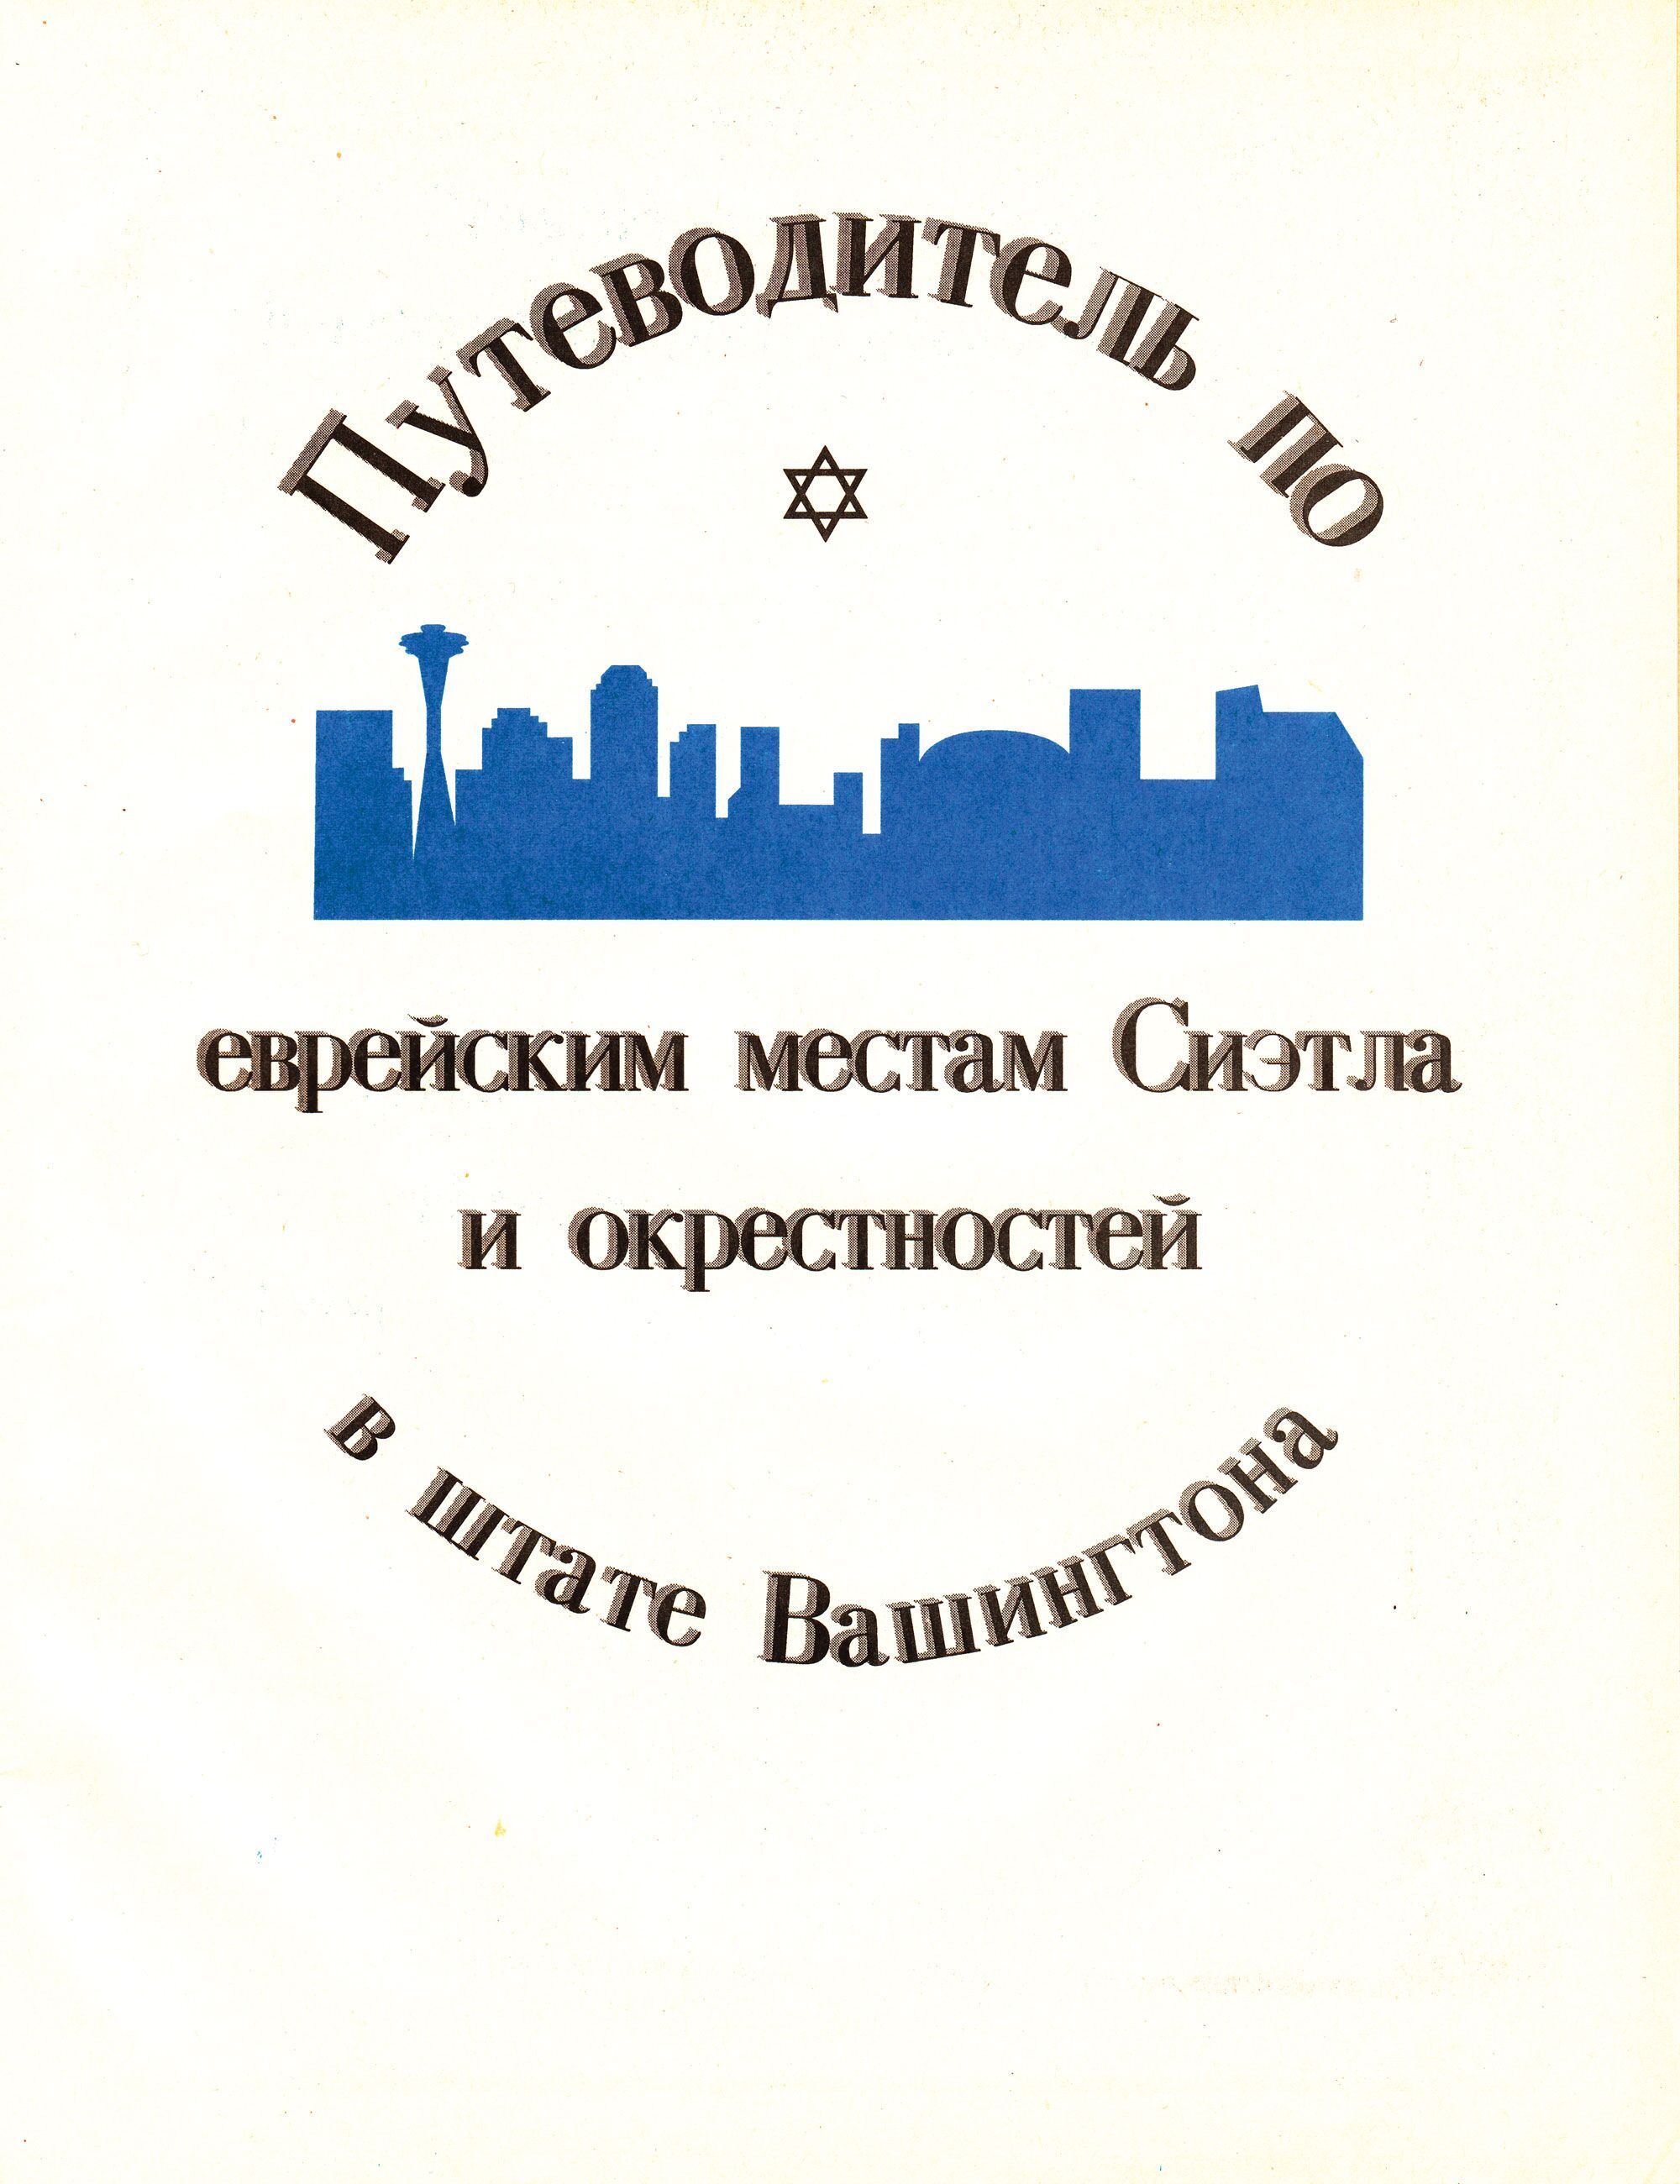 Pamphlet for a Soviet Jewish event